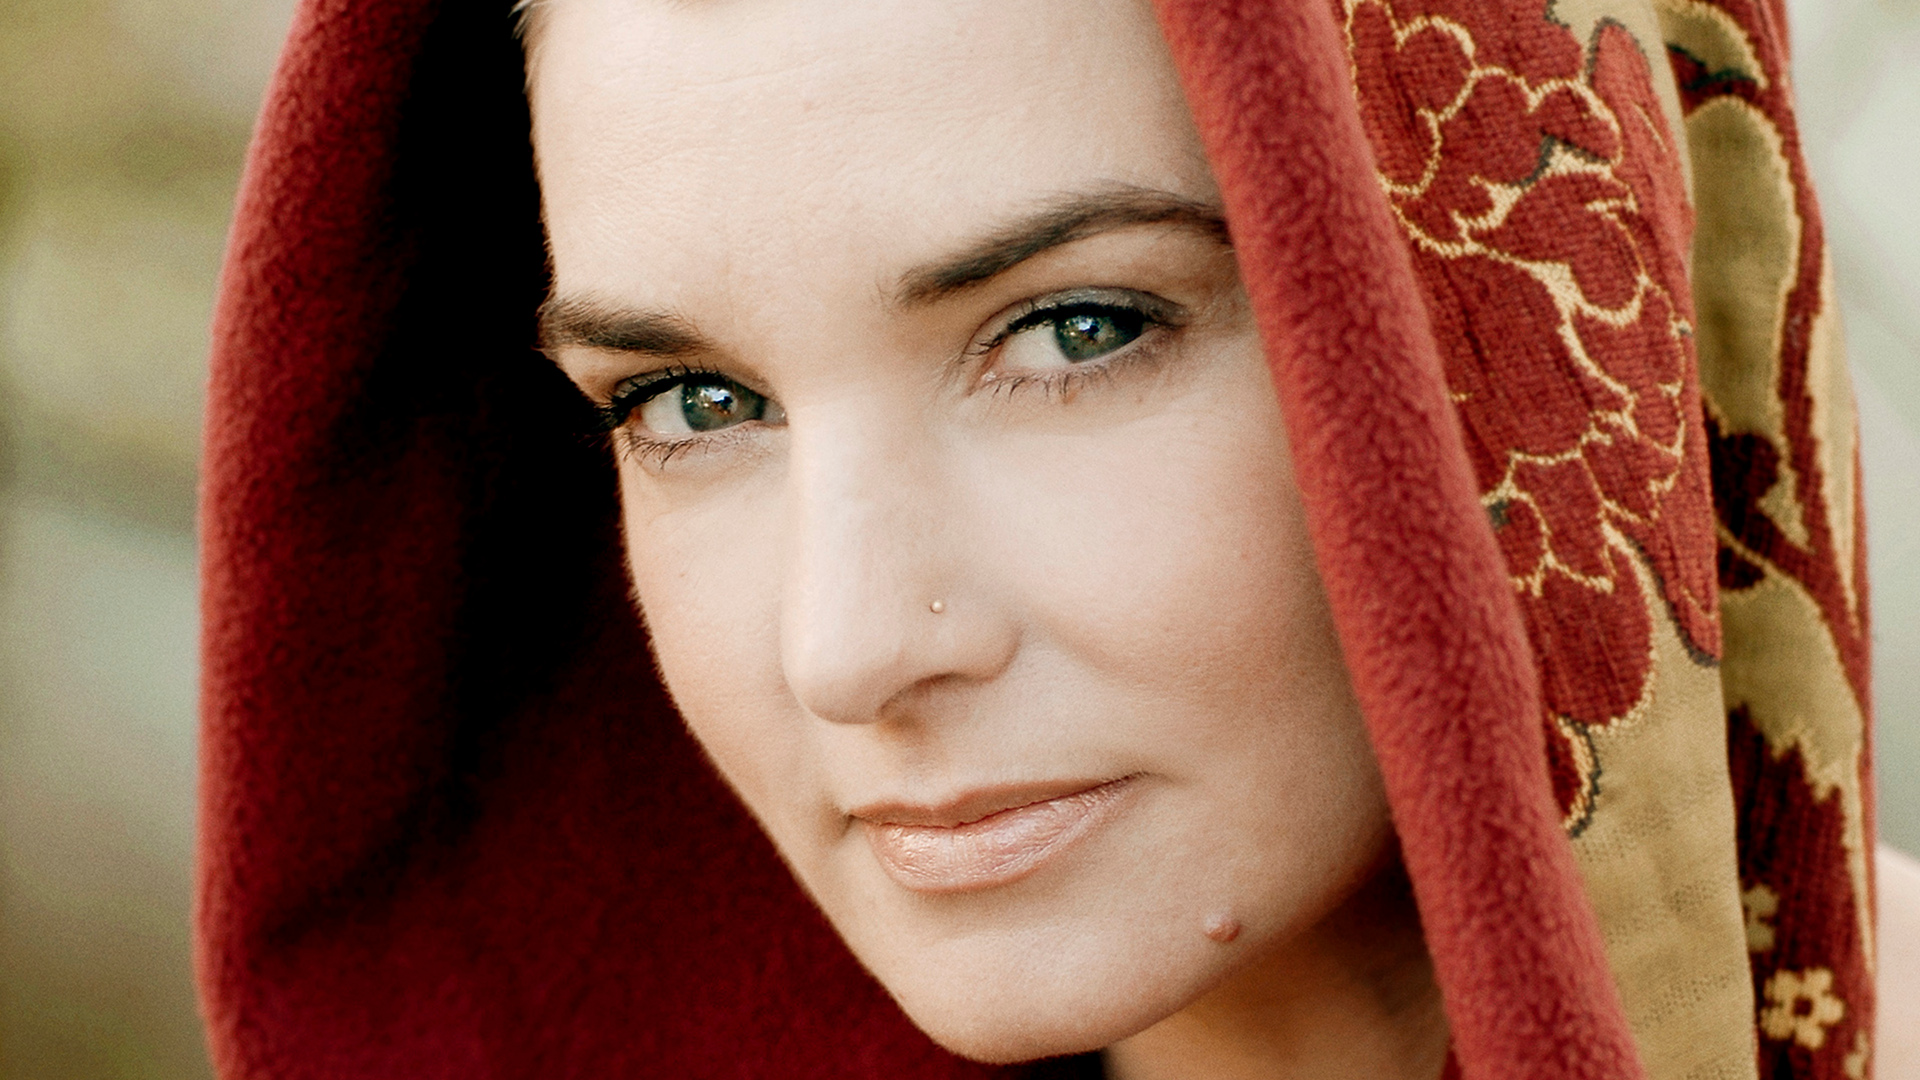 Nothing Compares 2 U av Sinéad O’connor